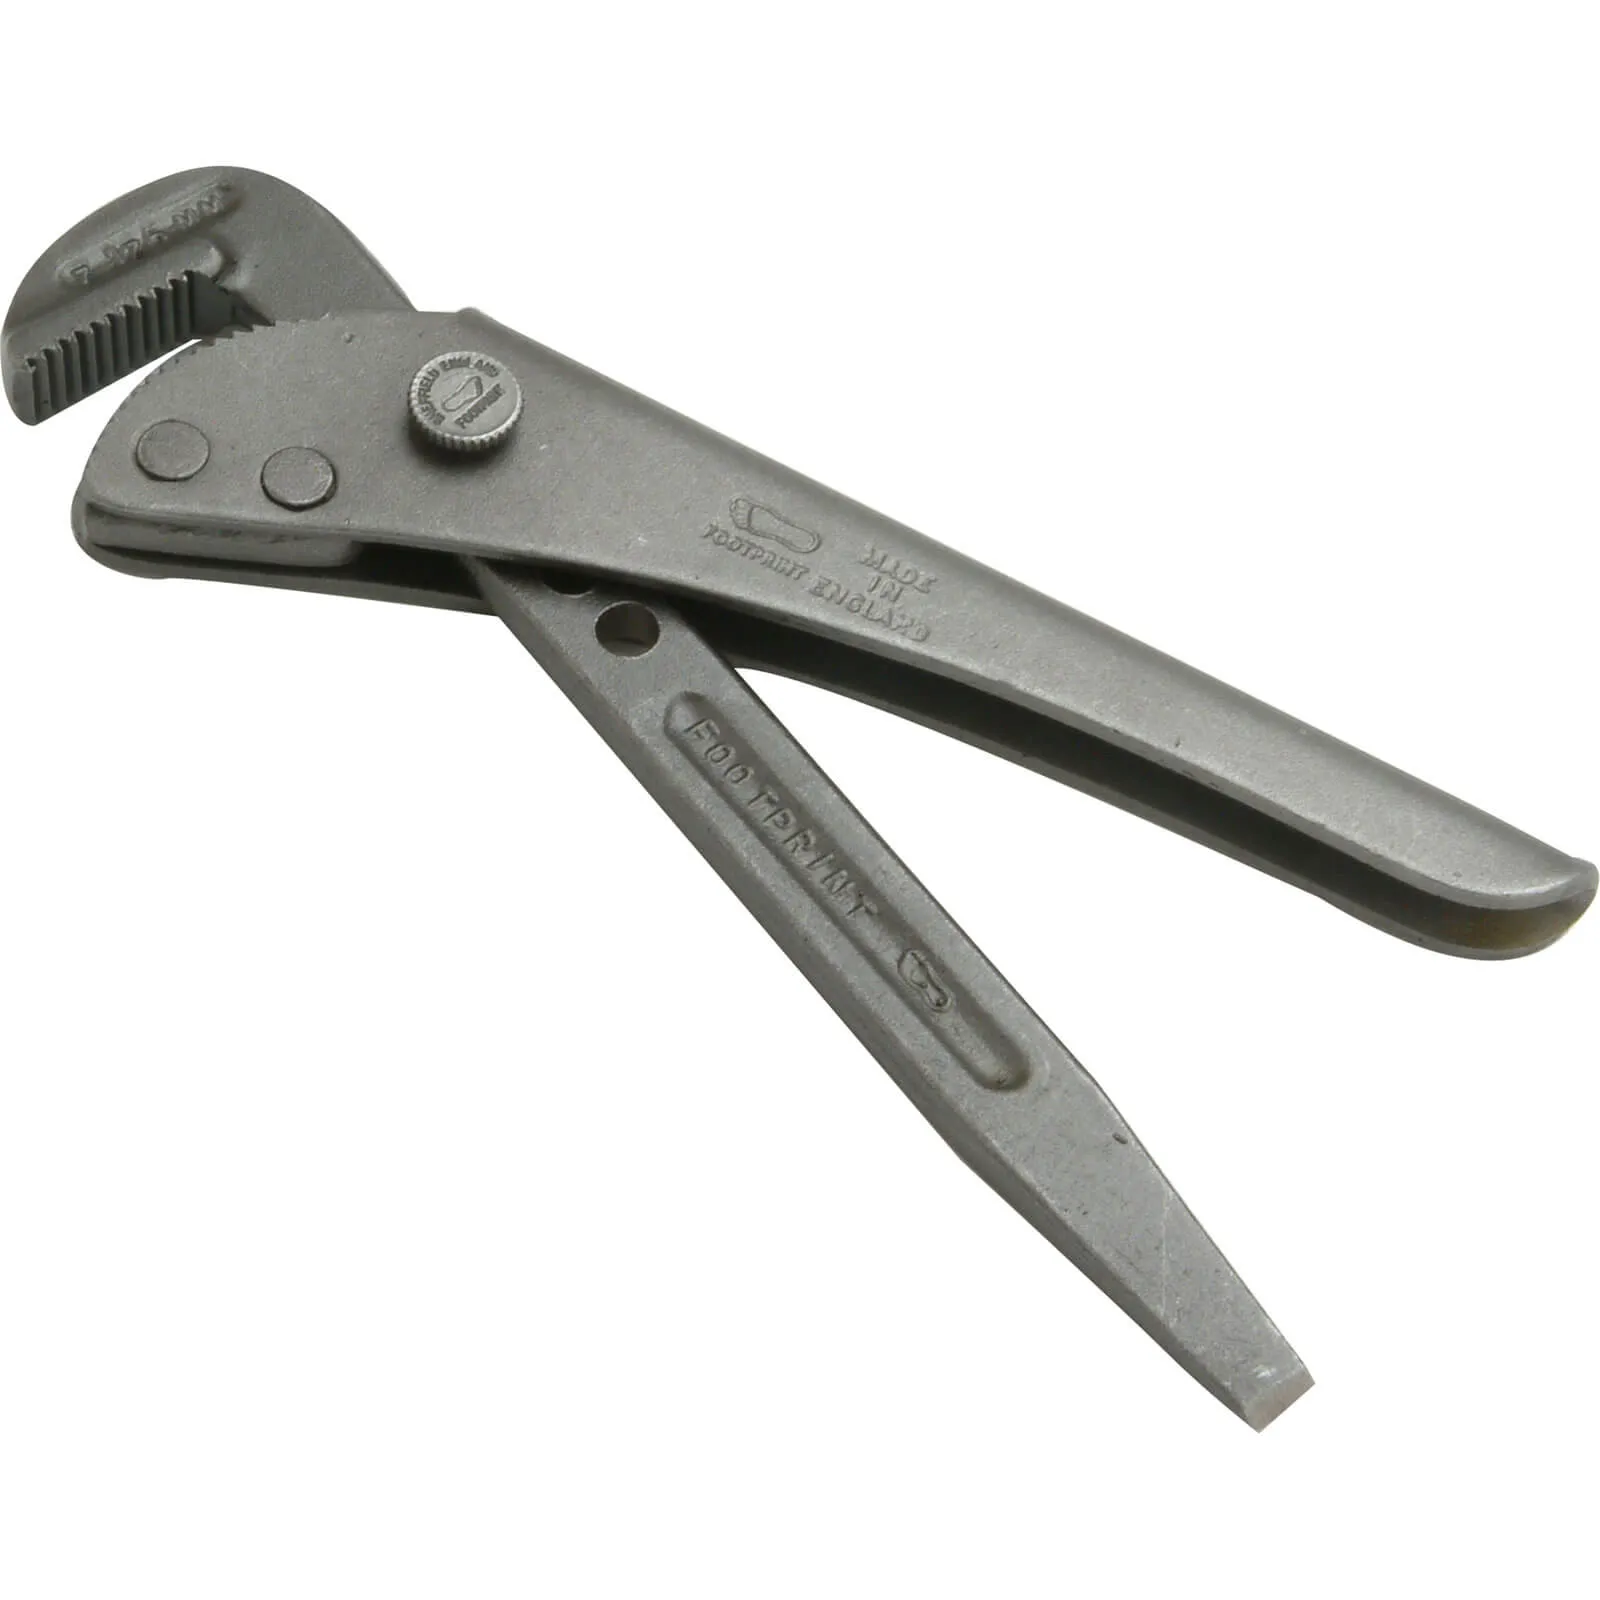 Footprint Pipe Wrench 698 Pattern - 7" / 175mm